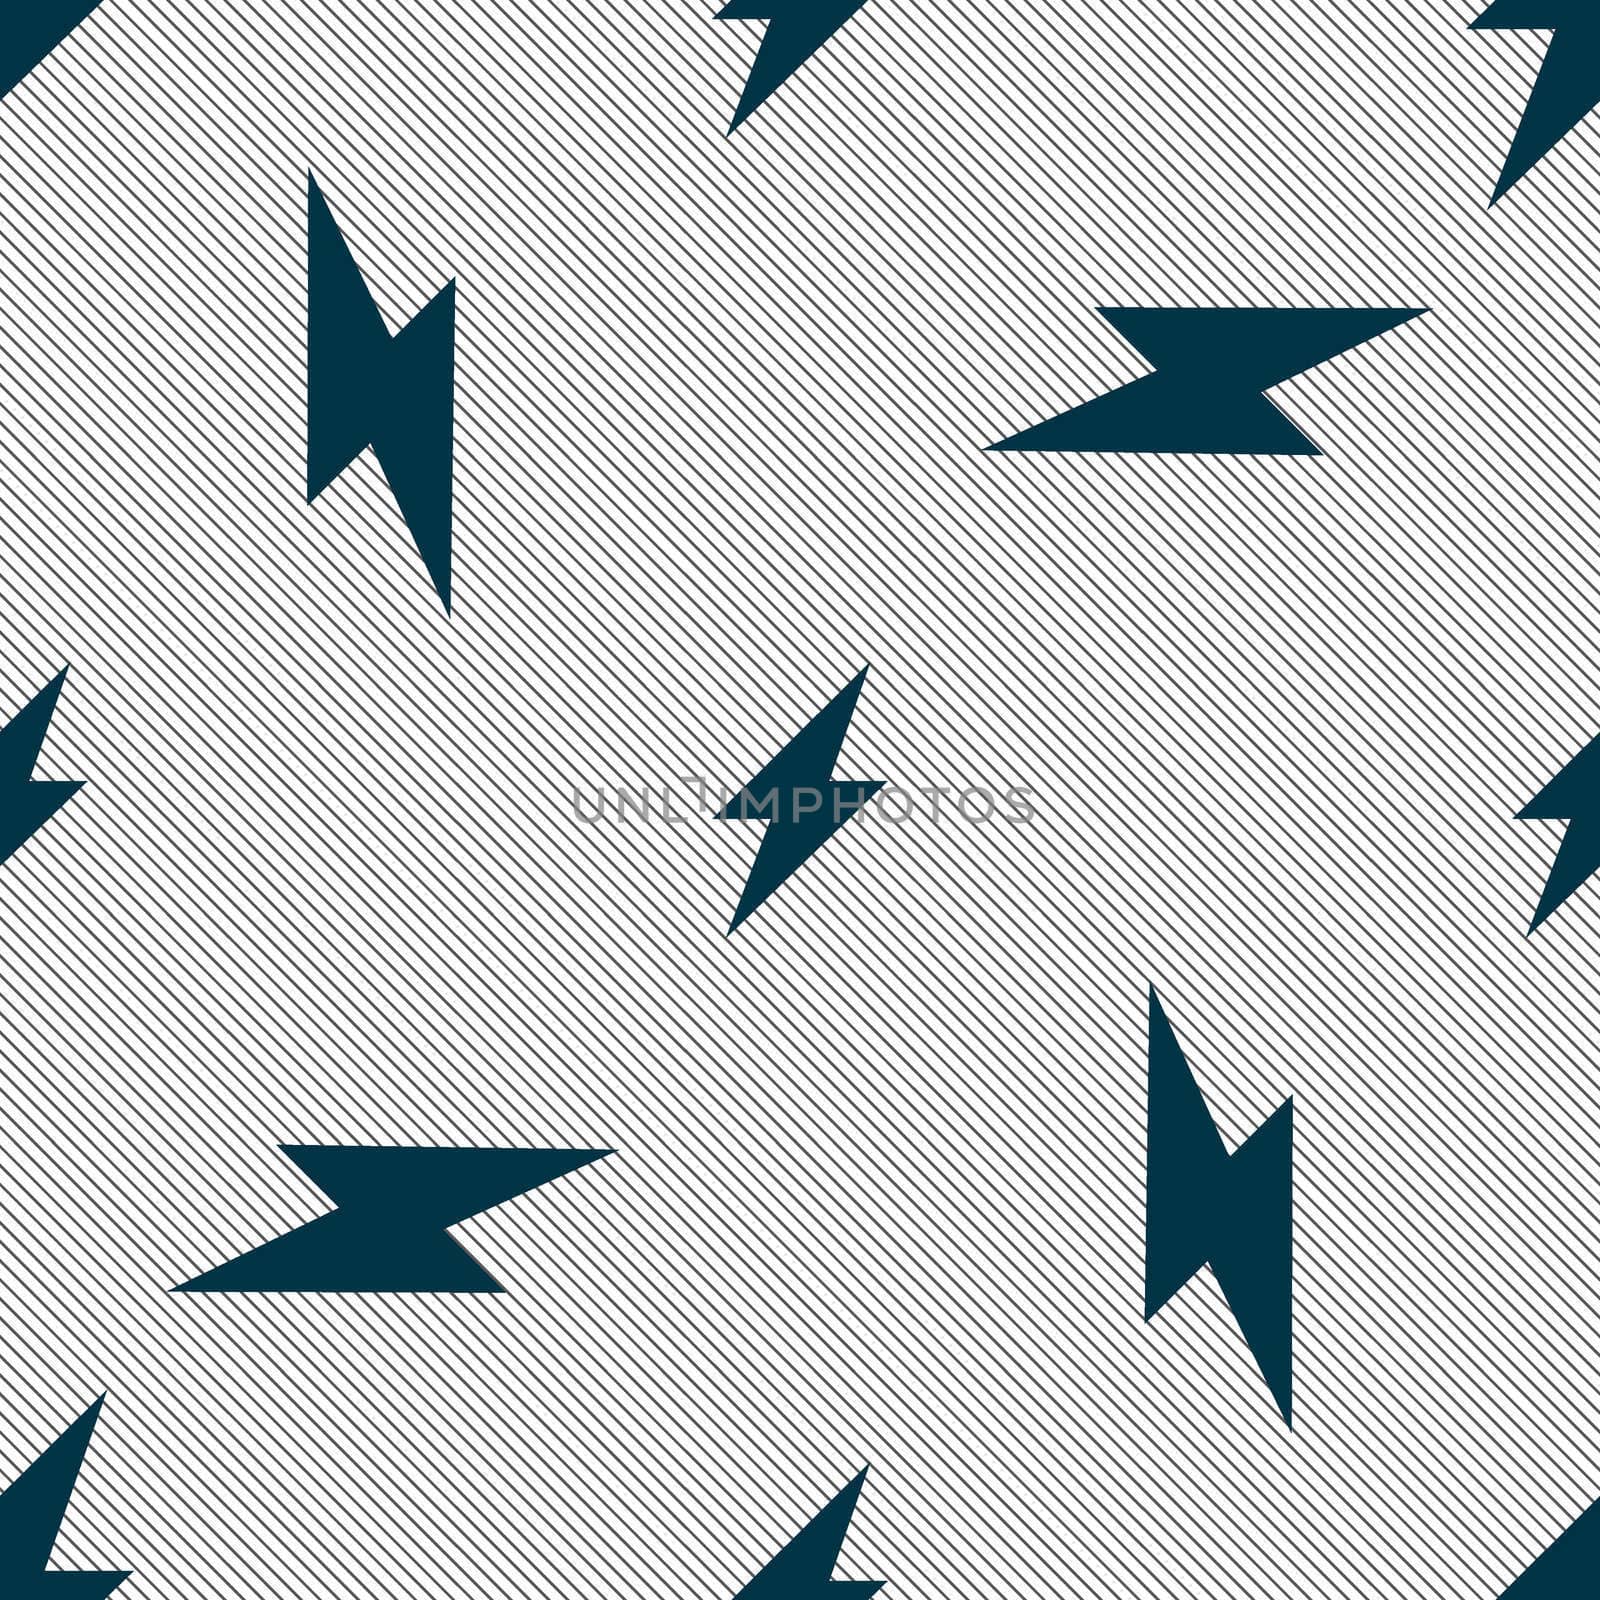 Photo flash icon sign. Seamless pattern with geometric texture. illustration